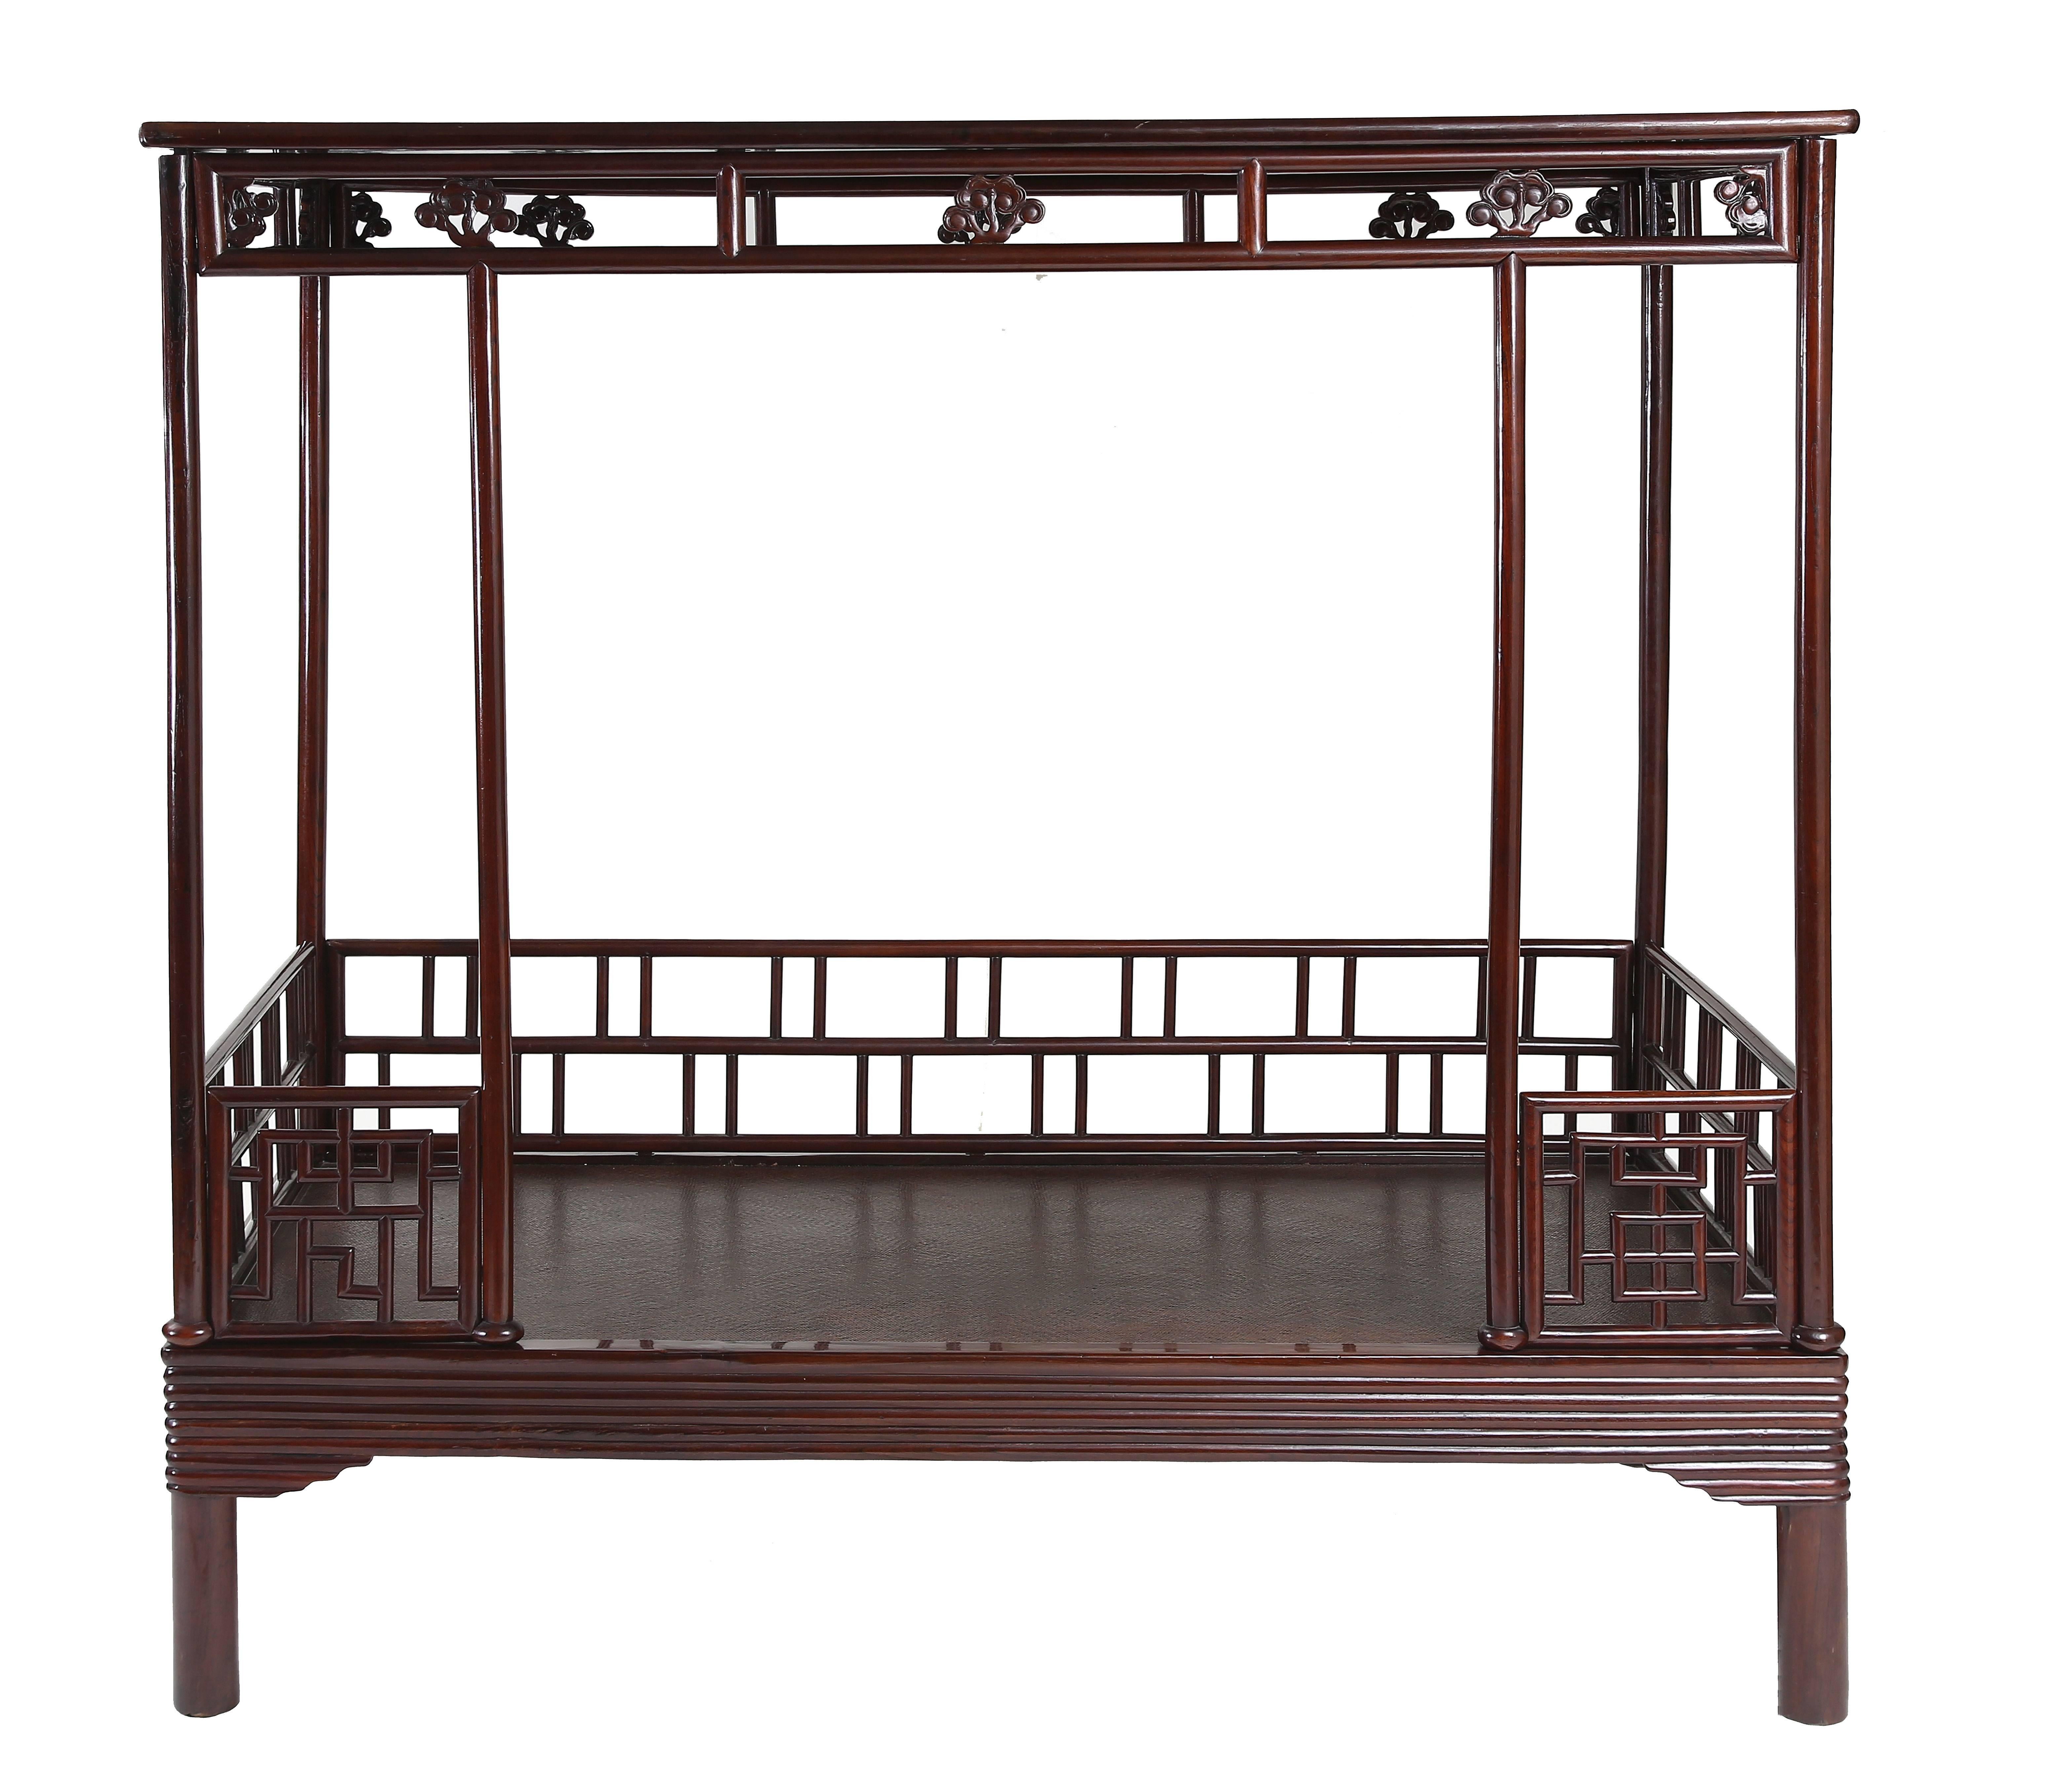 The bed frame enclosing a cane top and decorated with wrapped-around lipped molded edges and spandrels, supported on circular-sectioned legs; the six posts braced on the back and sides by railings of fretwork, two short railings flanking the opening